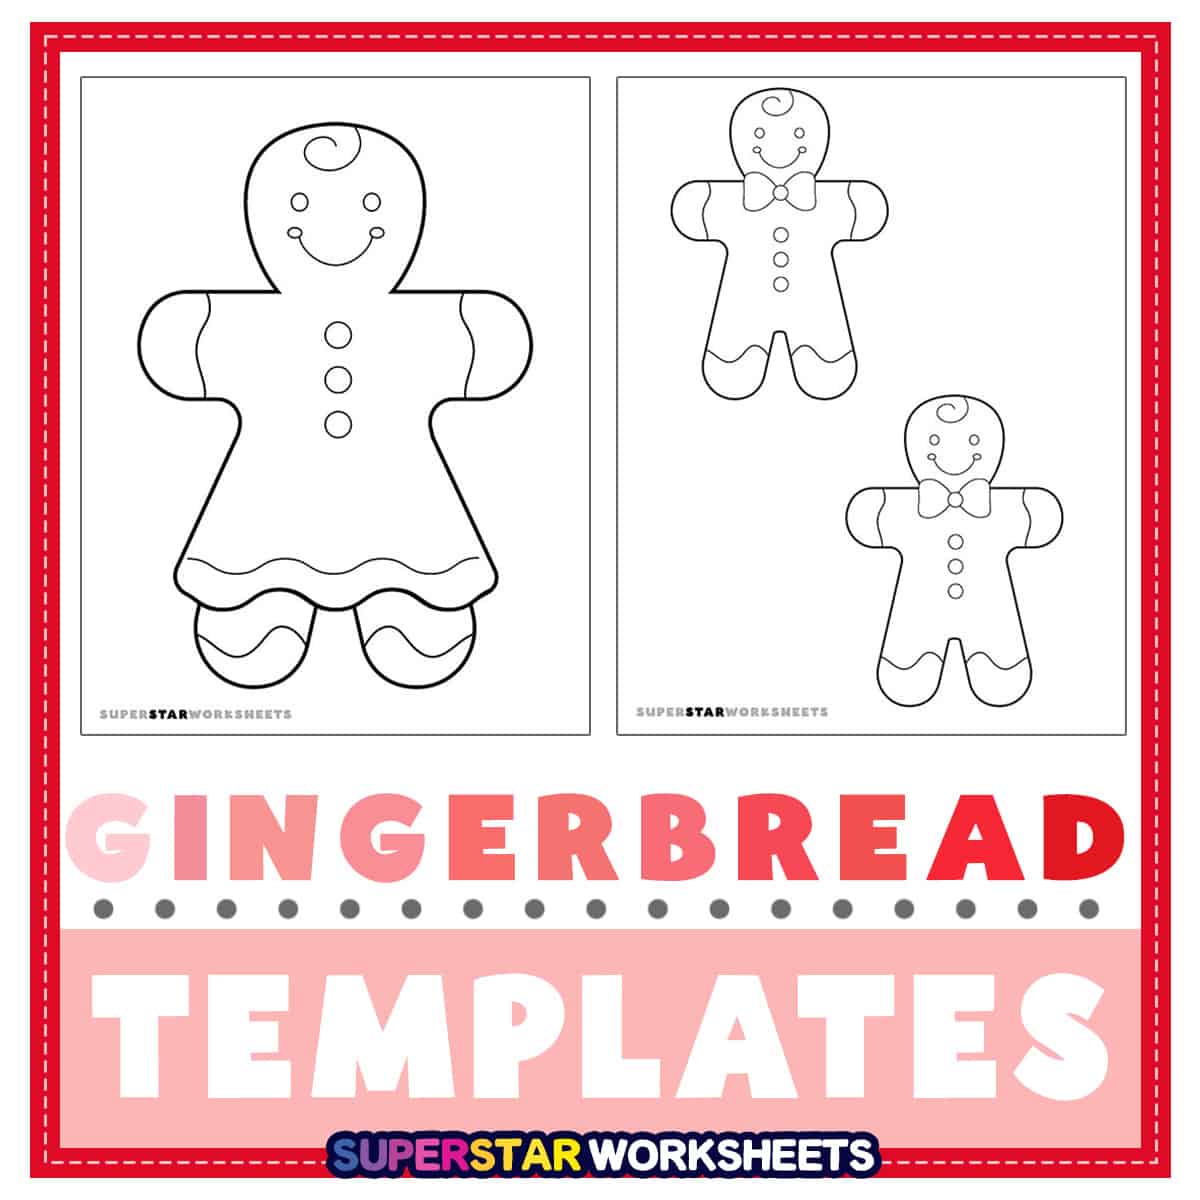 Blank Gingerbread Templates showing students how to decorate.